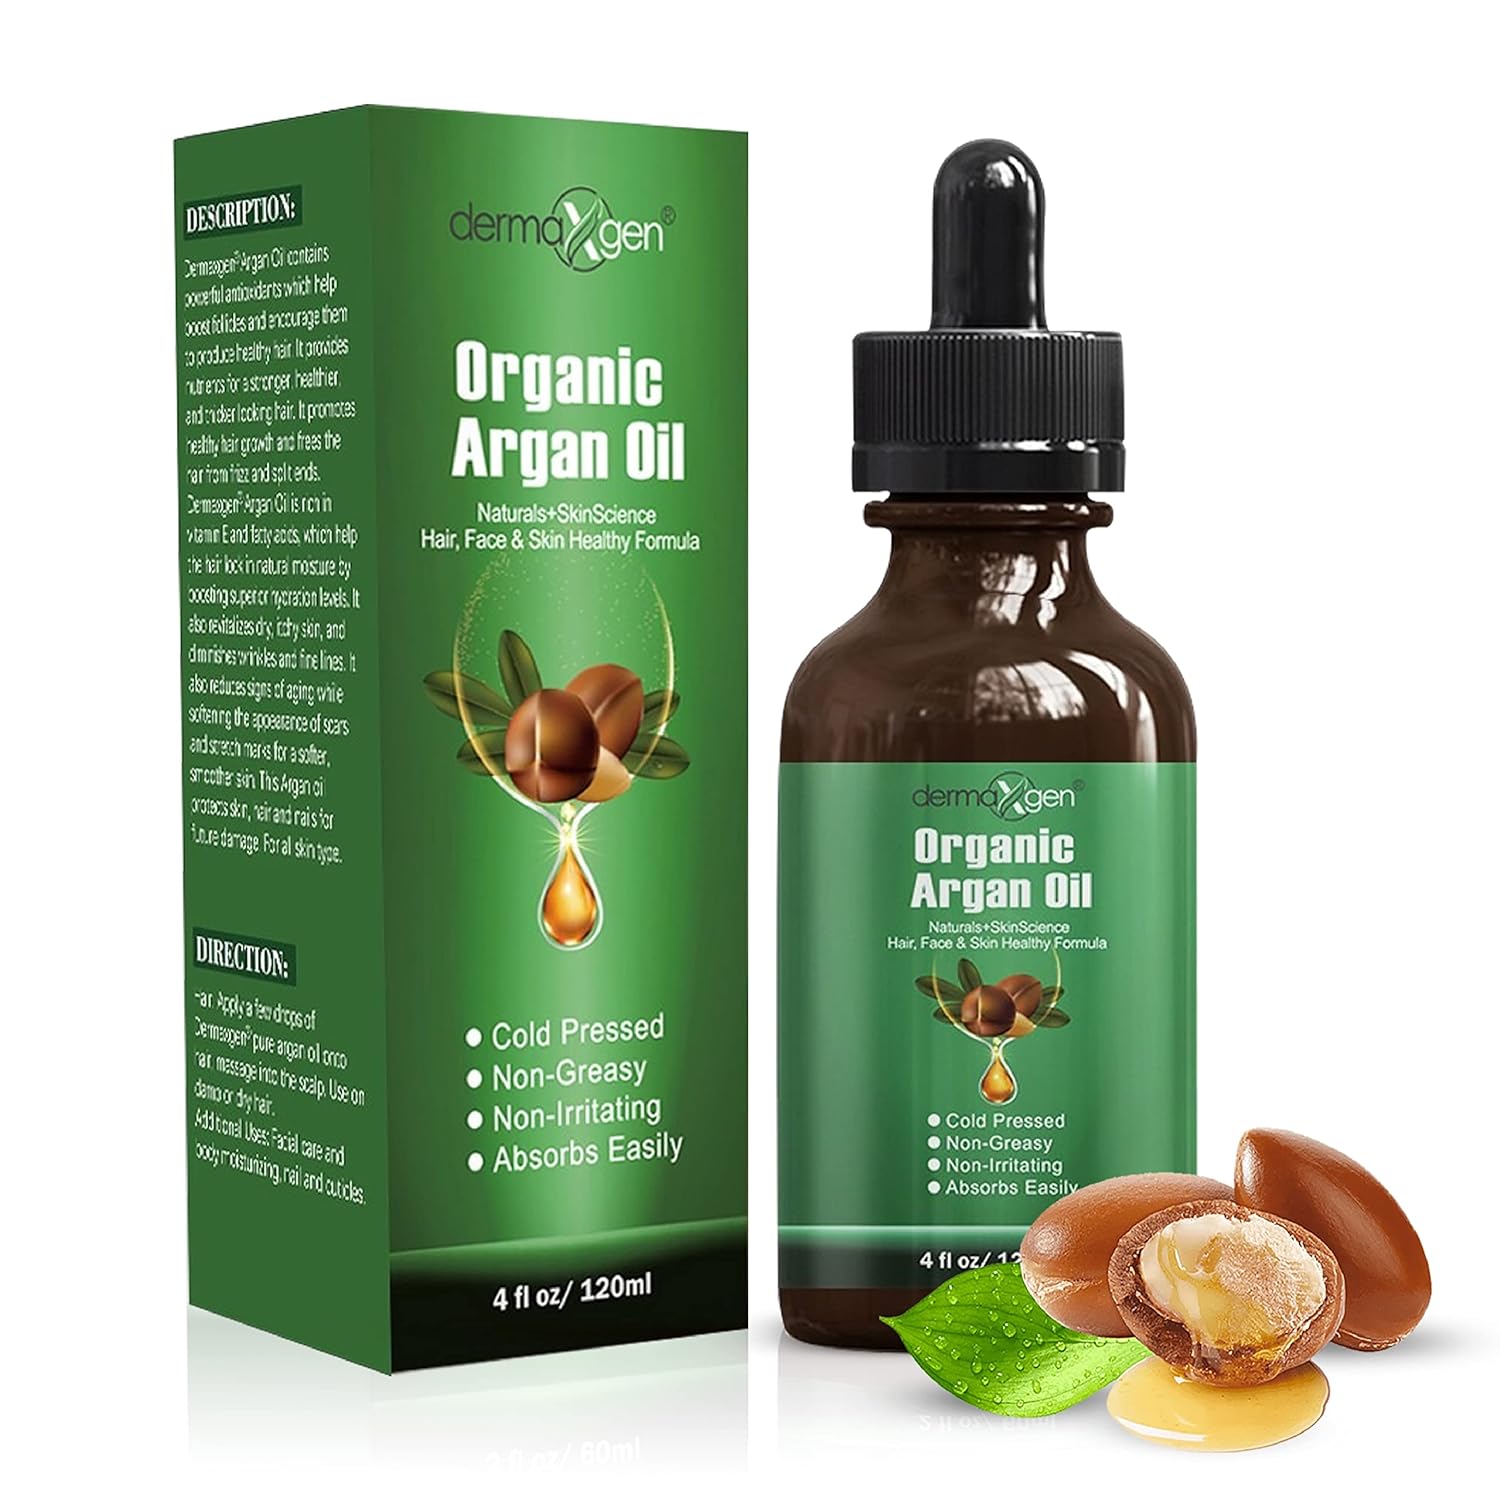 DERMAXGEN Argan Oil -100% Organic & Cold Pressed Moroccan Oil - Anti-Aging Moisturizing Treatment for Face, Hair, Skin & Nails, Acne Scars, Anti-Wrinkle. (4  )